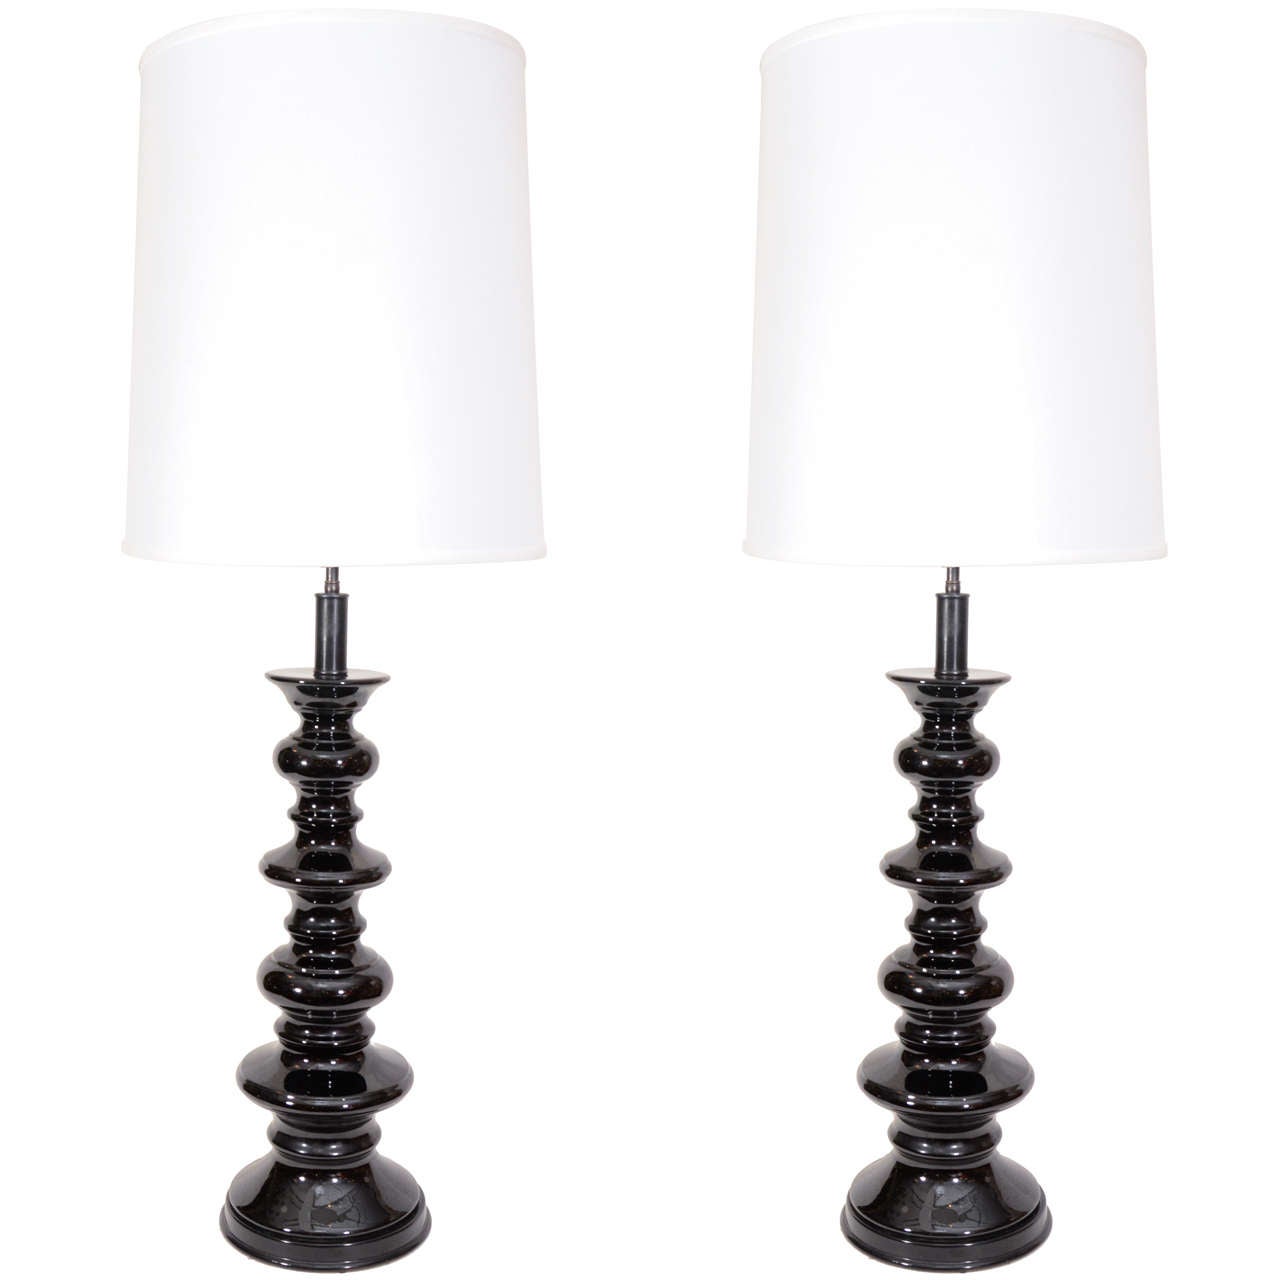 Pair of 1950s Glossy Black Table Lamps